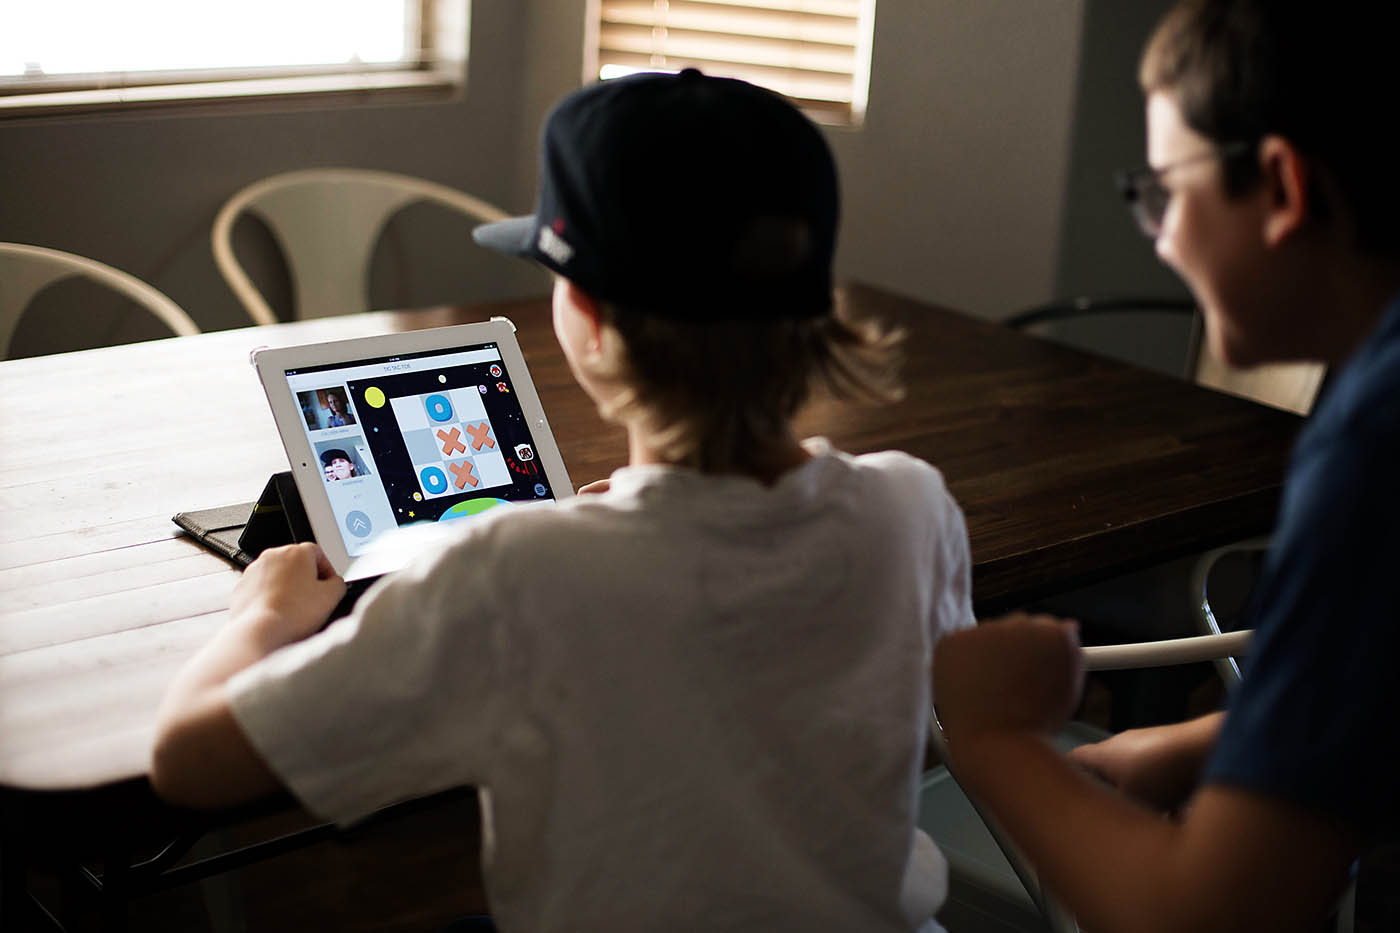 Panasonic HomeTeam online service that allows you to see, play games and read books with loved ones!